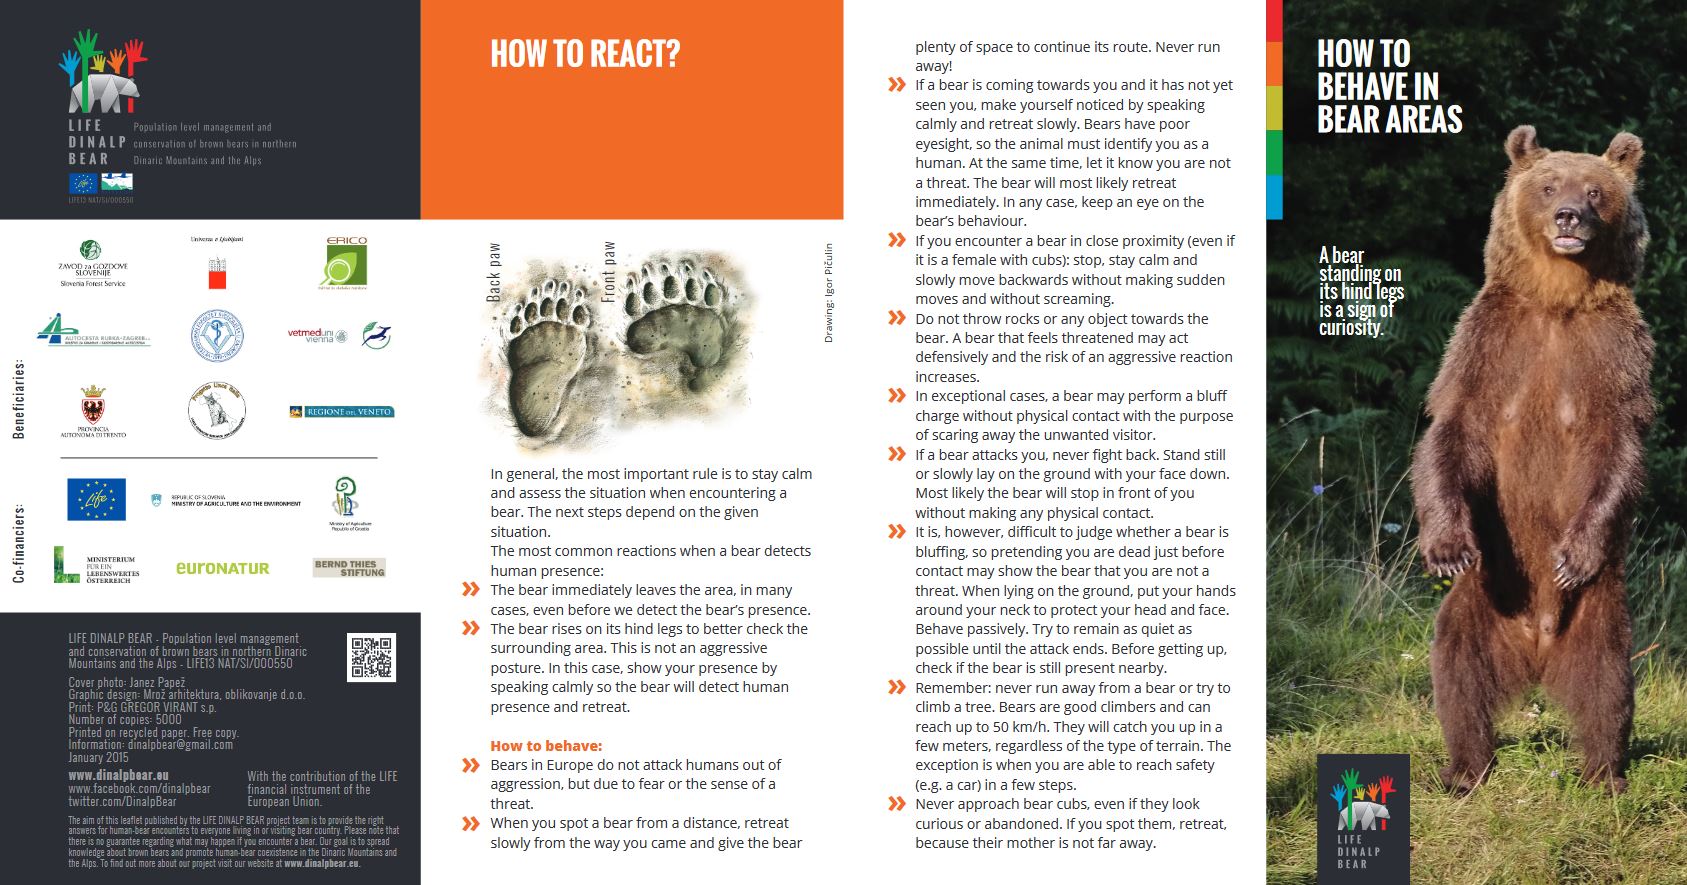 Leaflet "How to behave in bear areas"